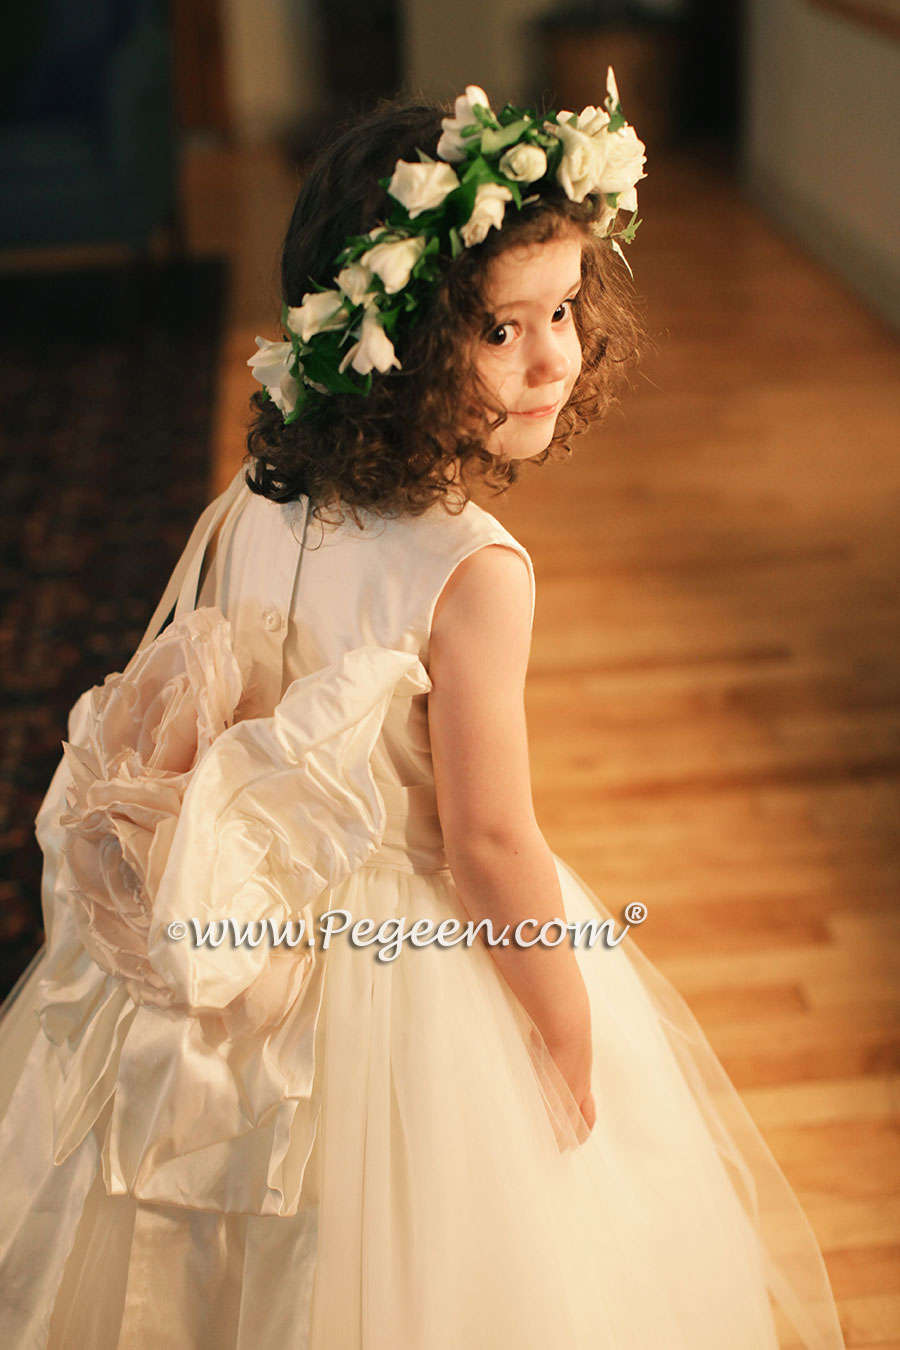 Pegeen Couture Flower Girl Dress Style 402 in New Ivory with Pegeen Signature Bustle